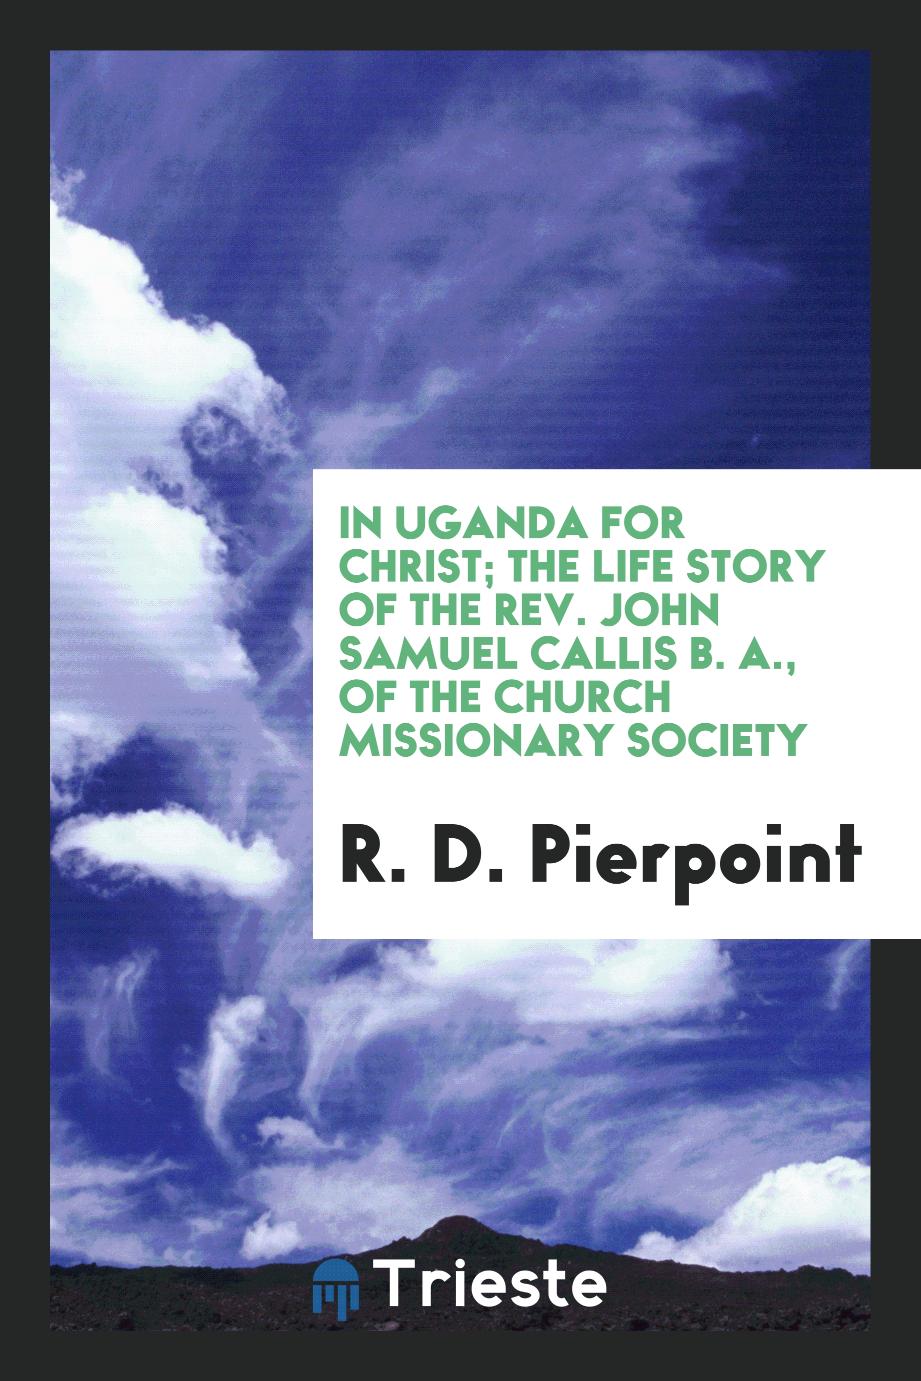 In Uganda for Christ; the life story of the Rev. John Samuel Callis B. A., of the Church Missionary Society